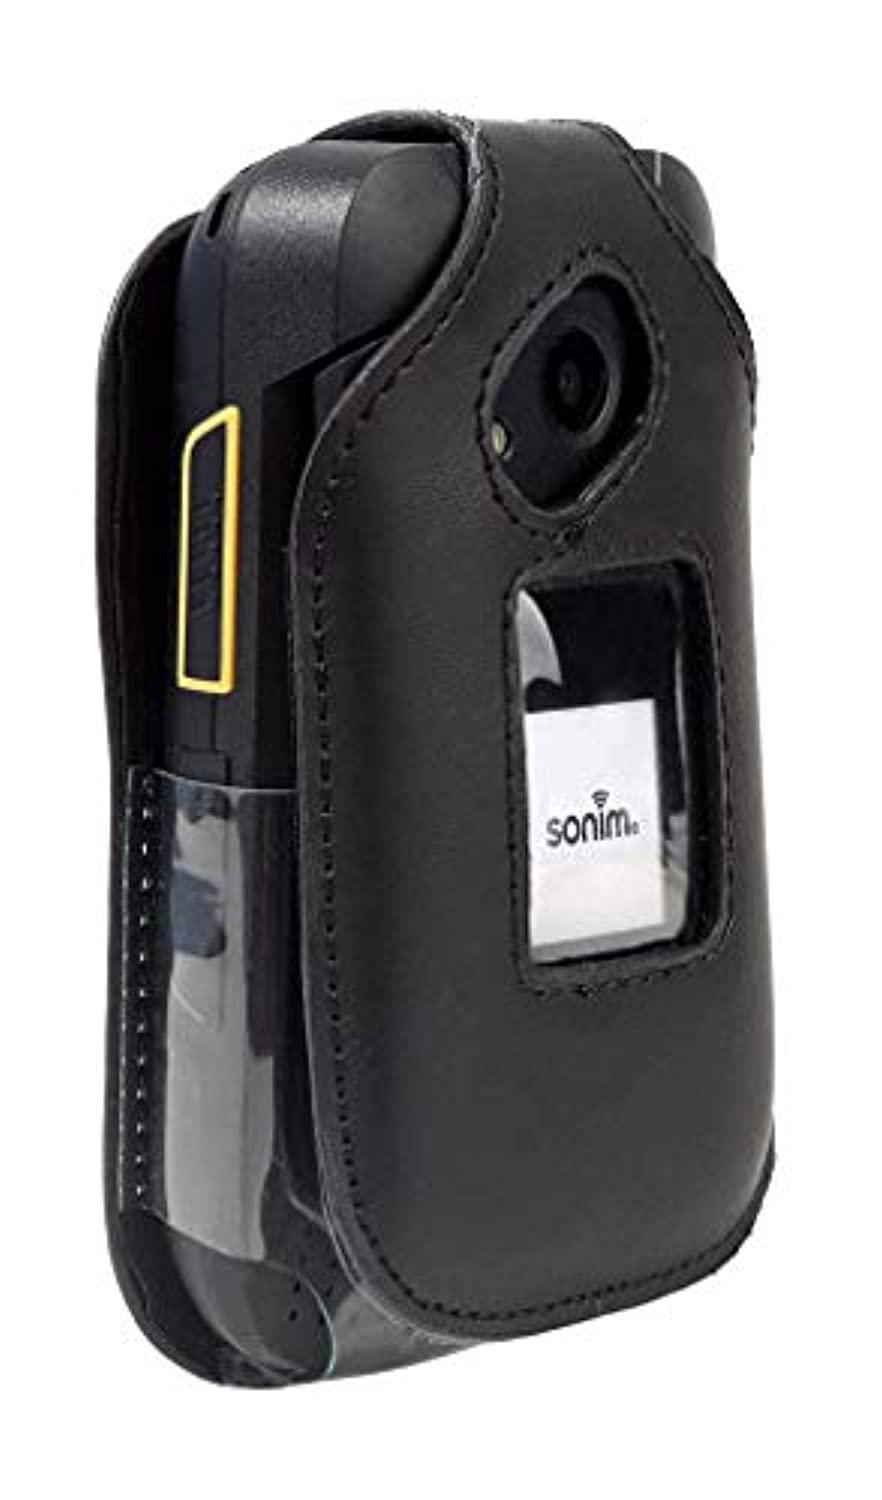 wireless protech case with clip compatible with sonim xp3 phone model xp3800, form fitted leather case, rotating belt clip, b